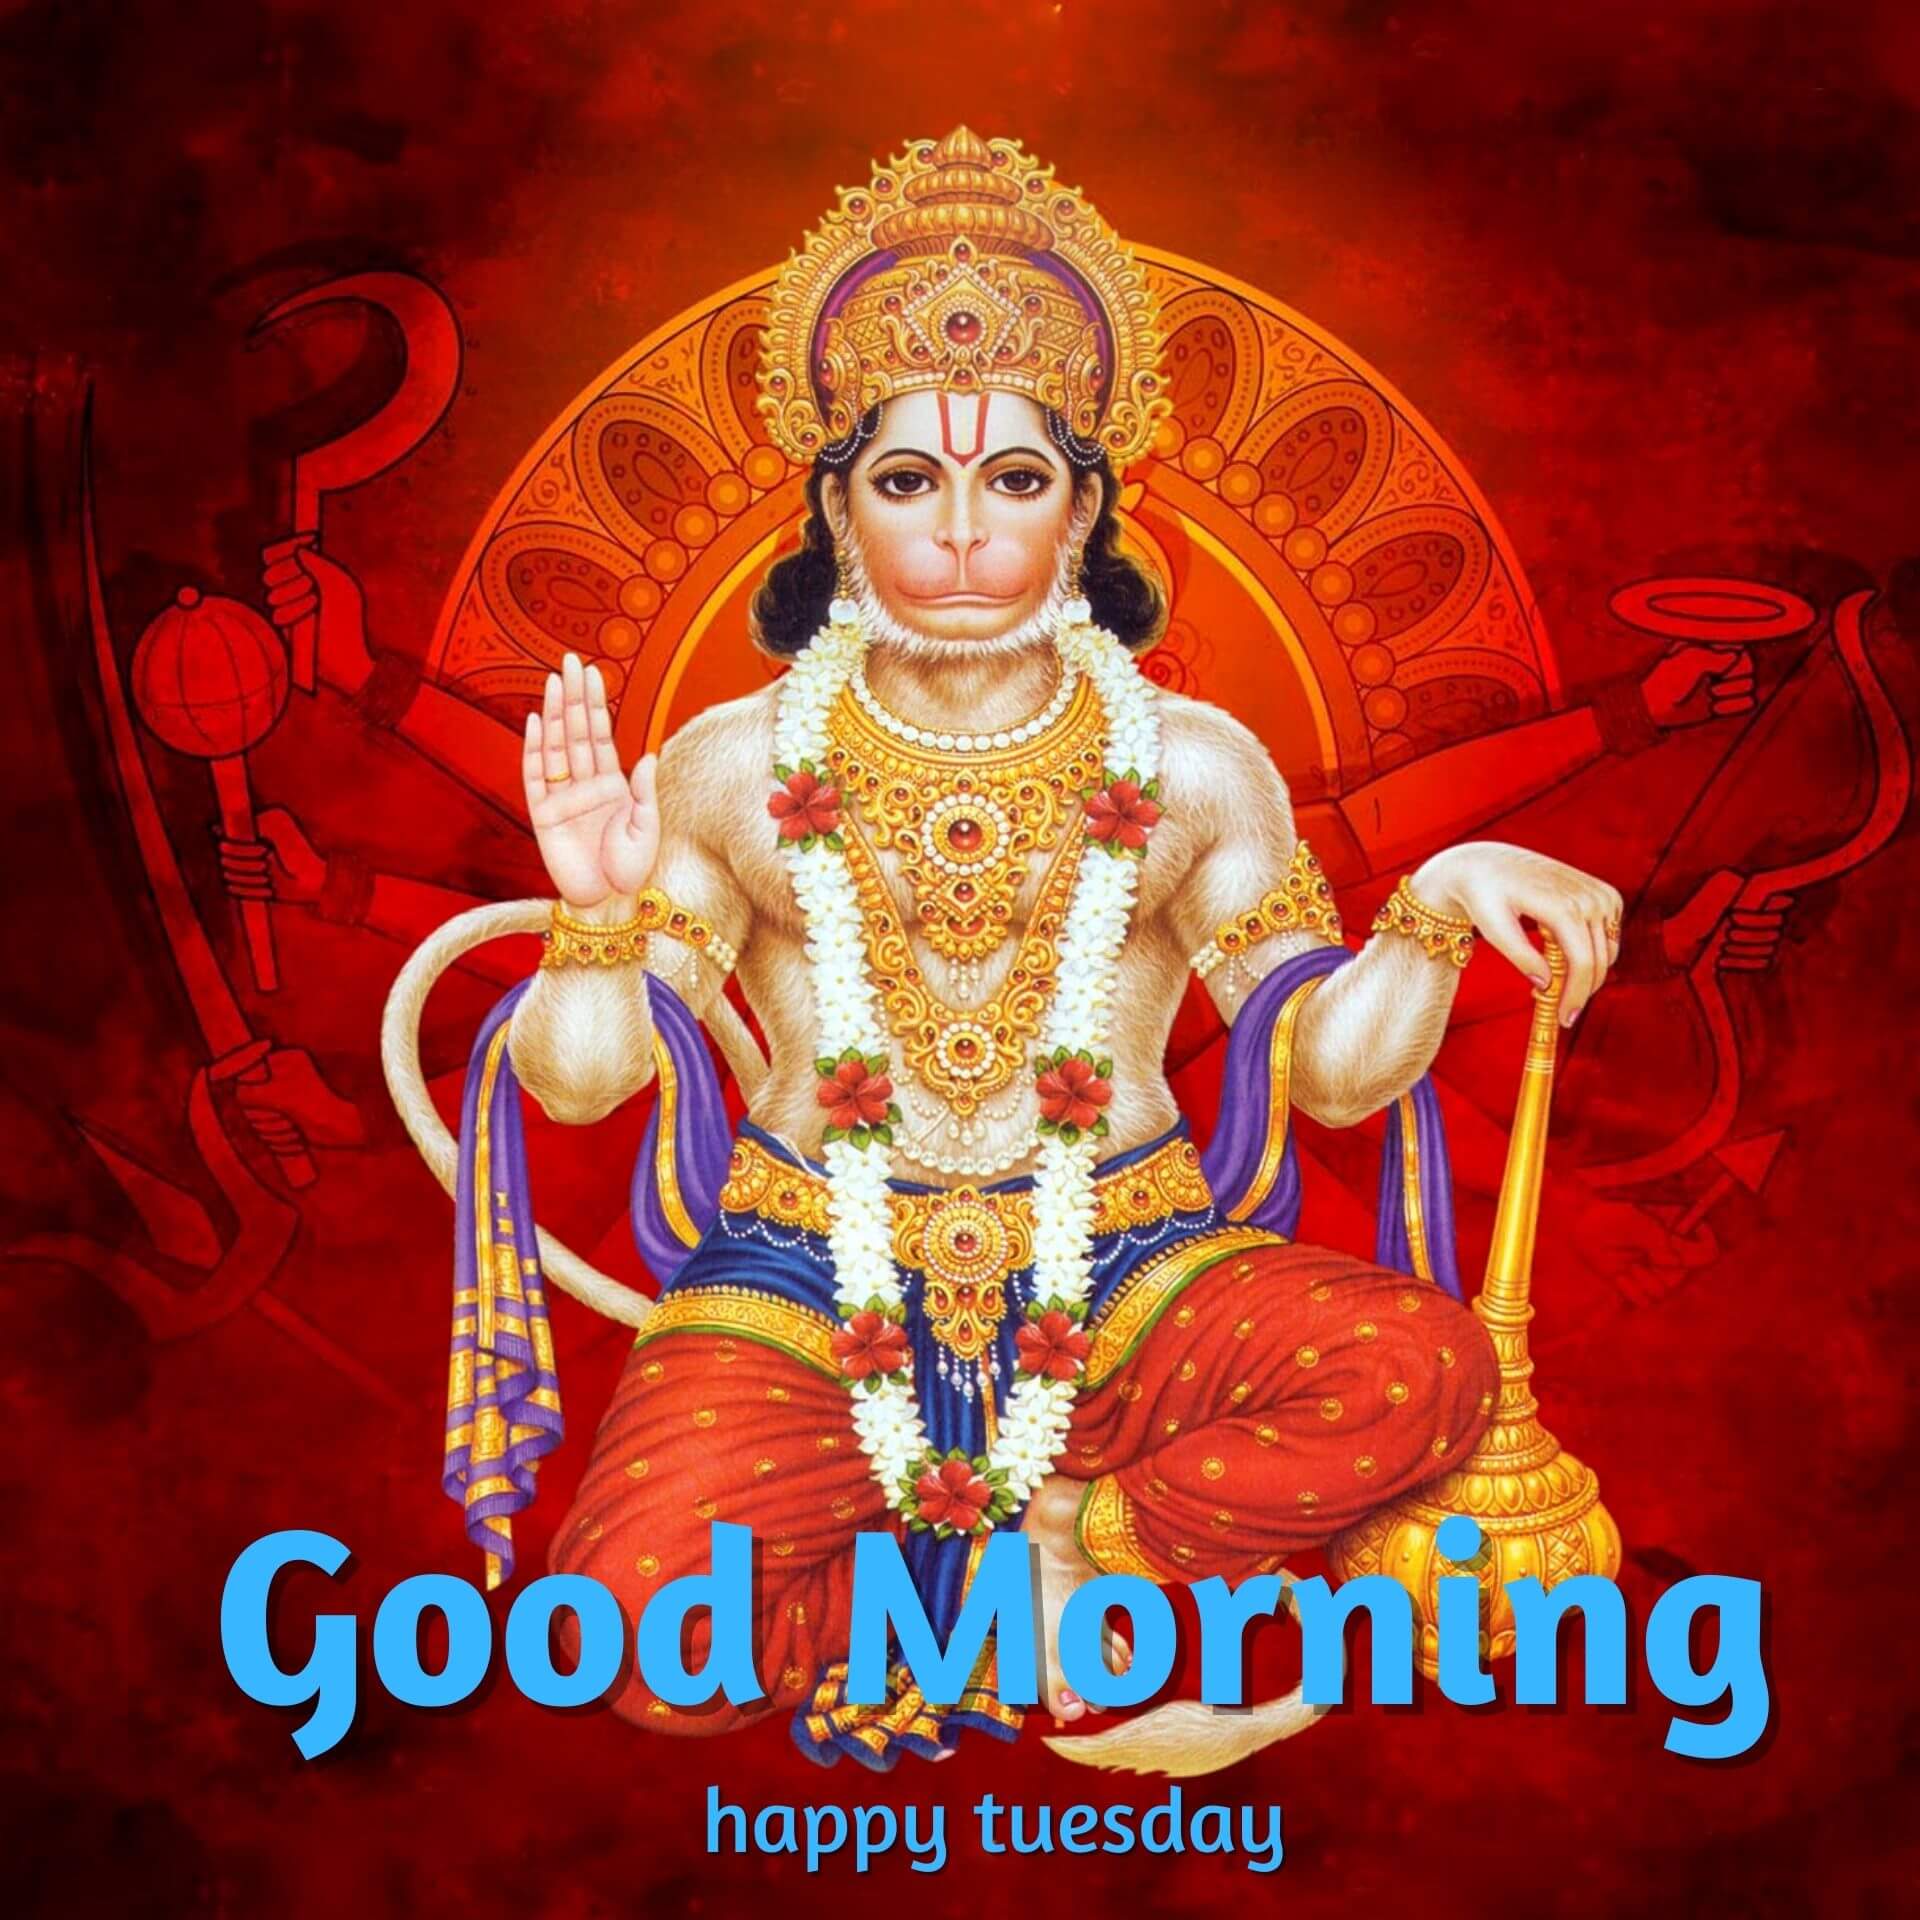 Tuesday Good Morning Pics pictures Download